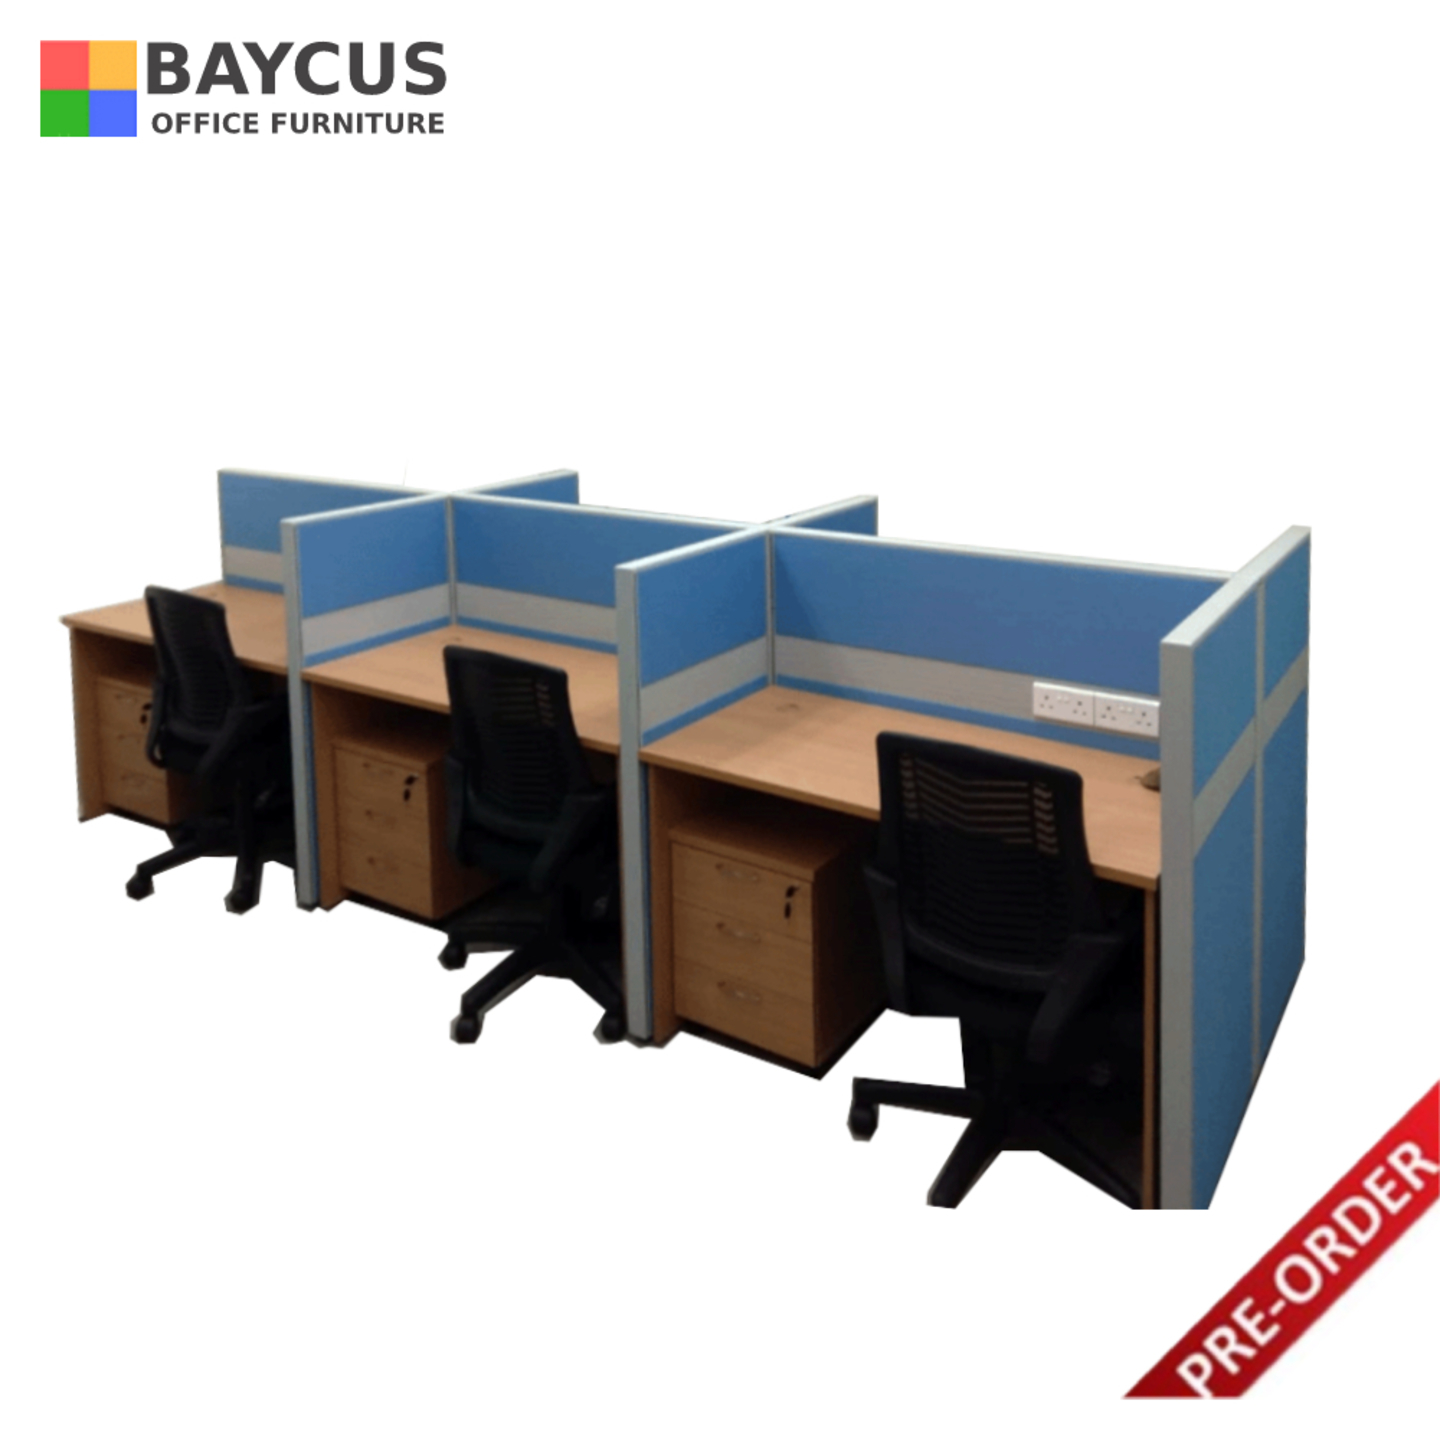 BAY54 Partition System for 6 Pax Partition Only